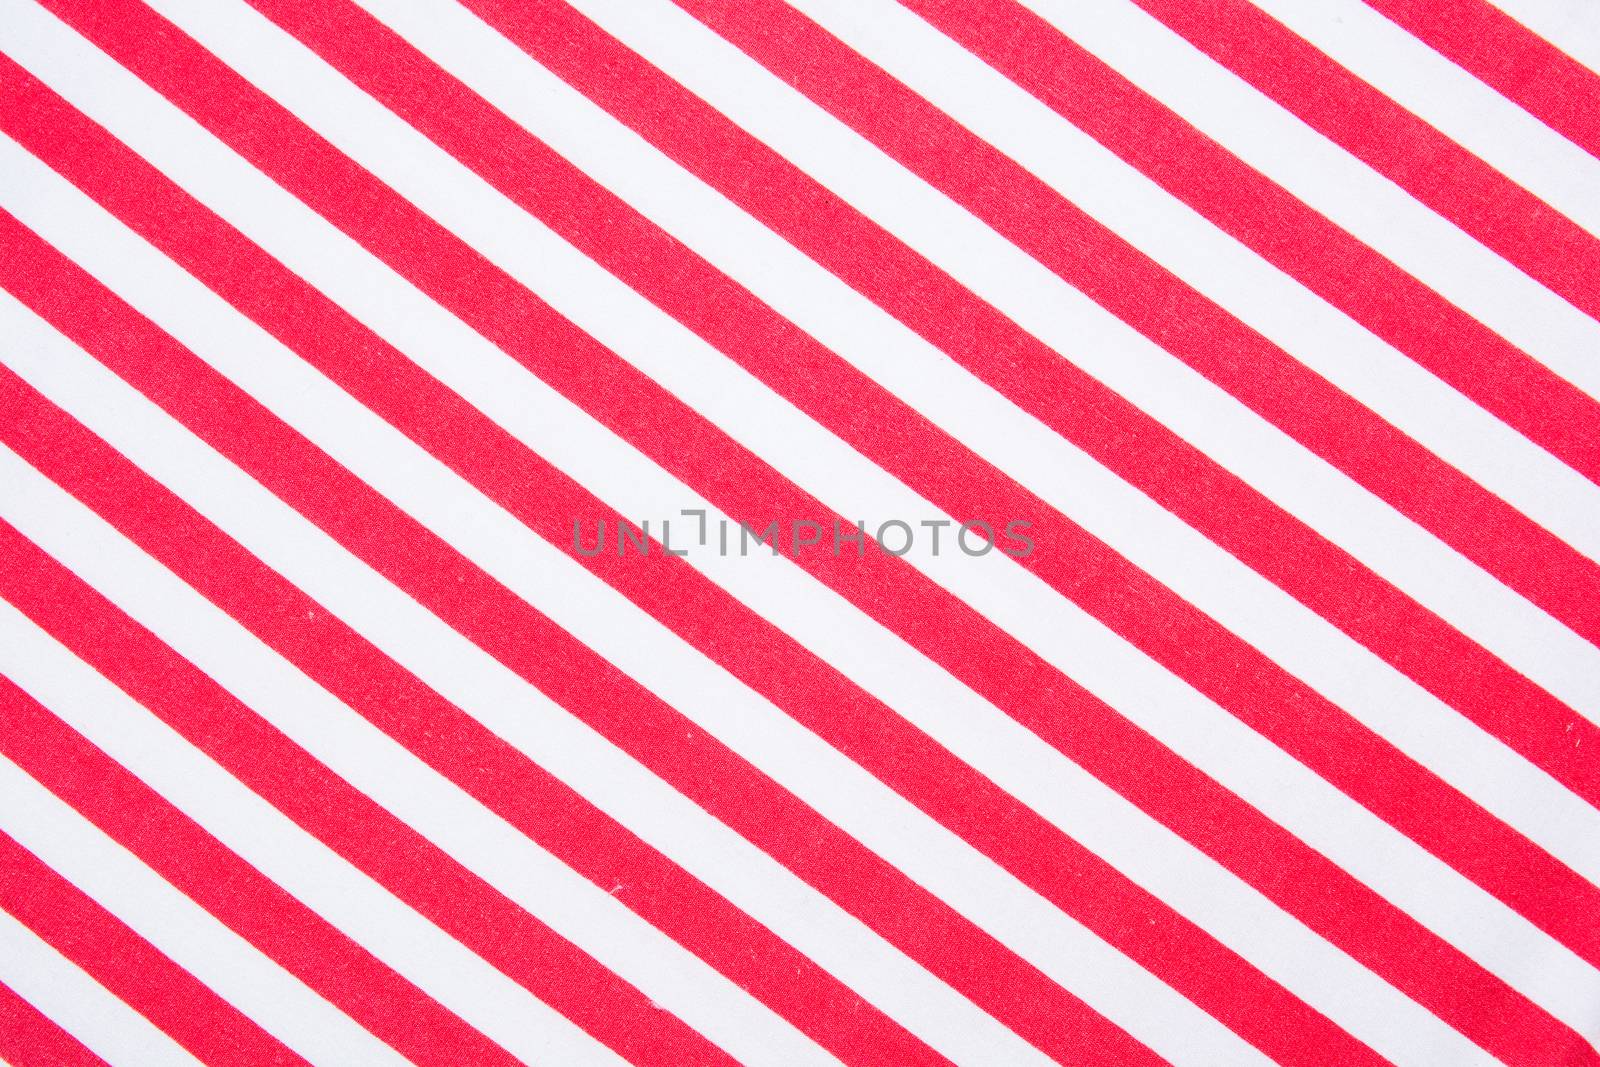 the red and white strip texture background ideal for wallpaper and background purposes